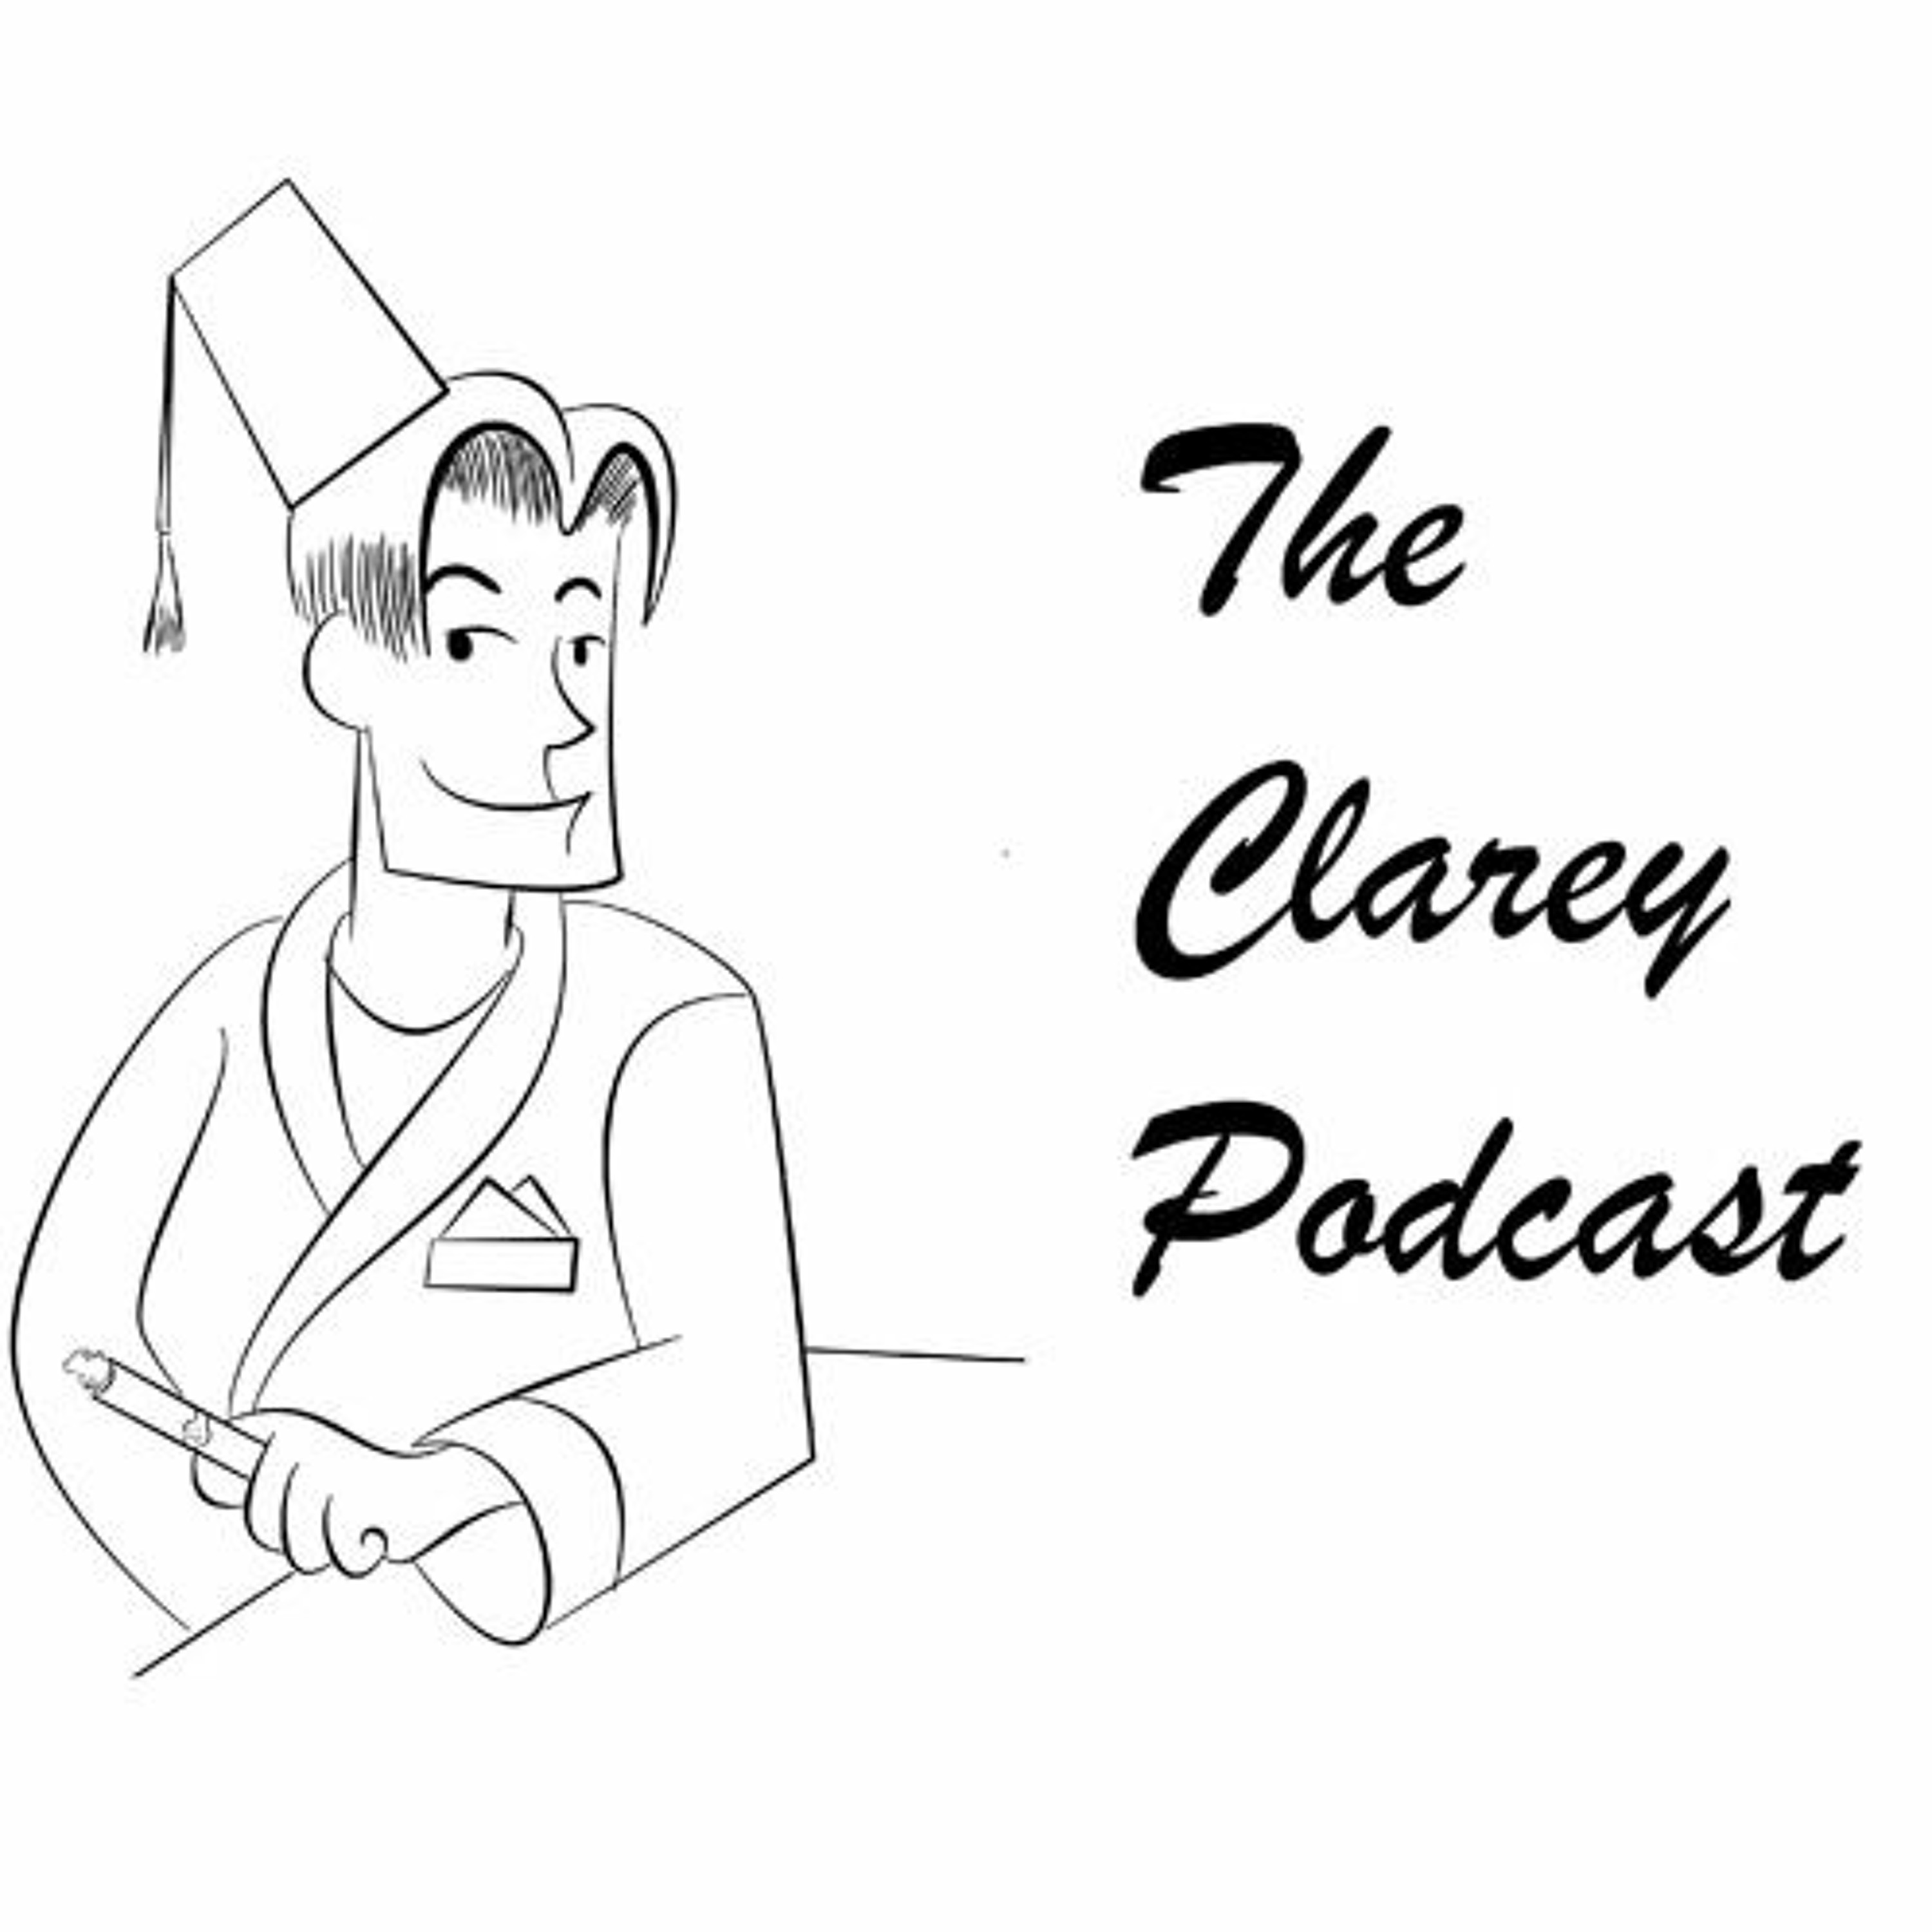 The Clarey Podcast #283 - The 